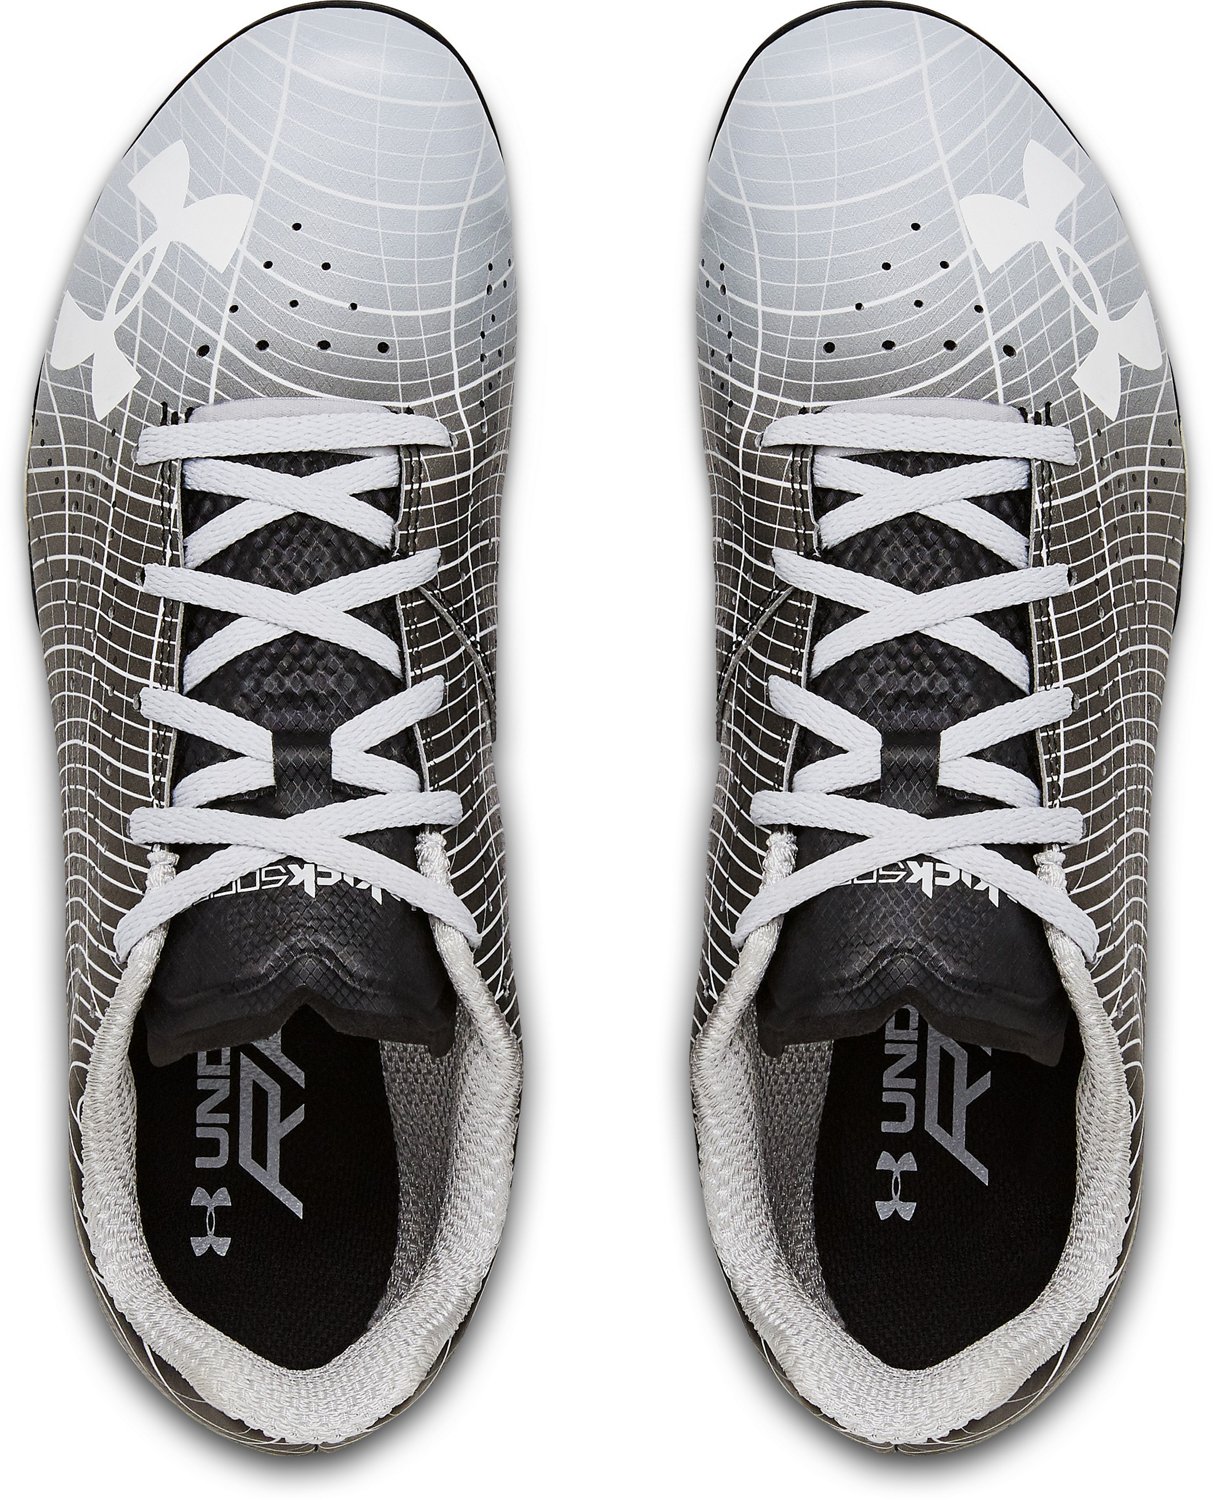 Under Armour Adult Kick Distance 4 Track Spikes